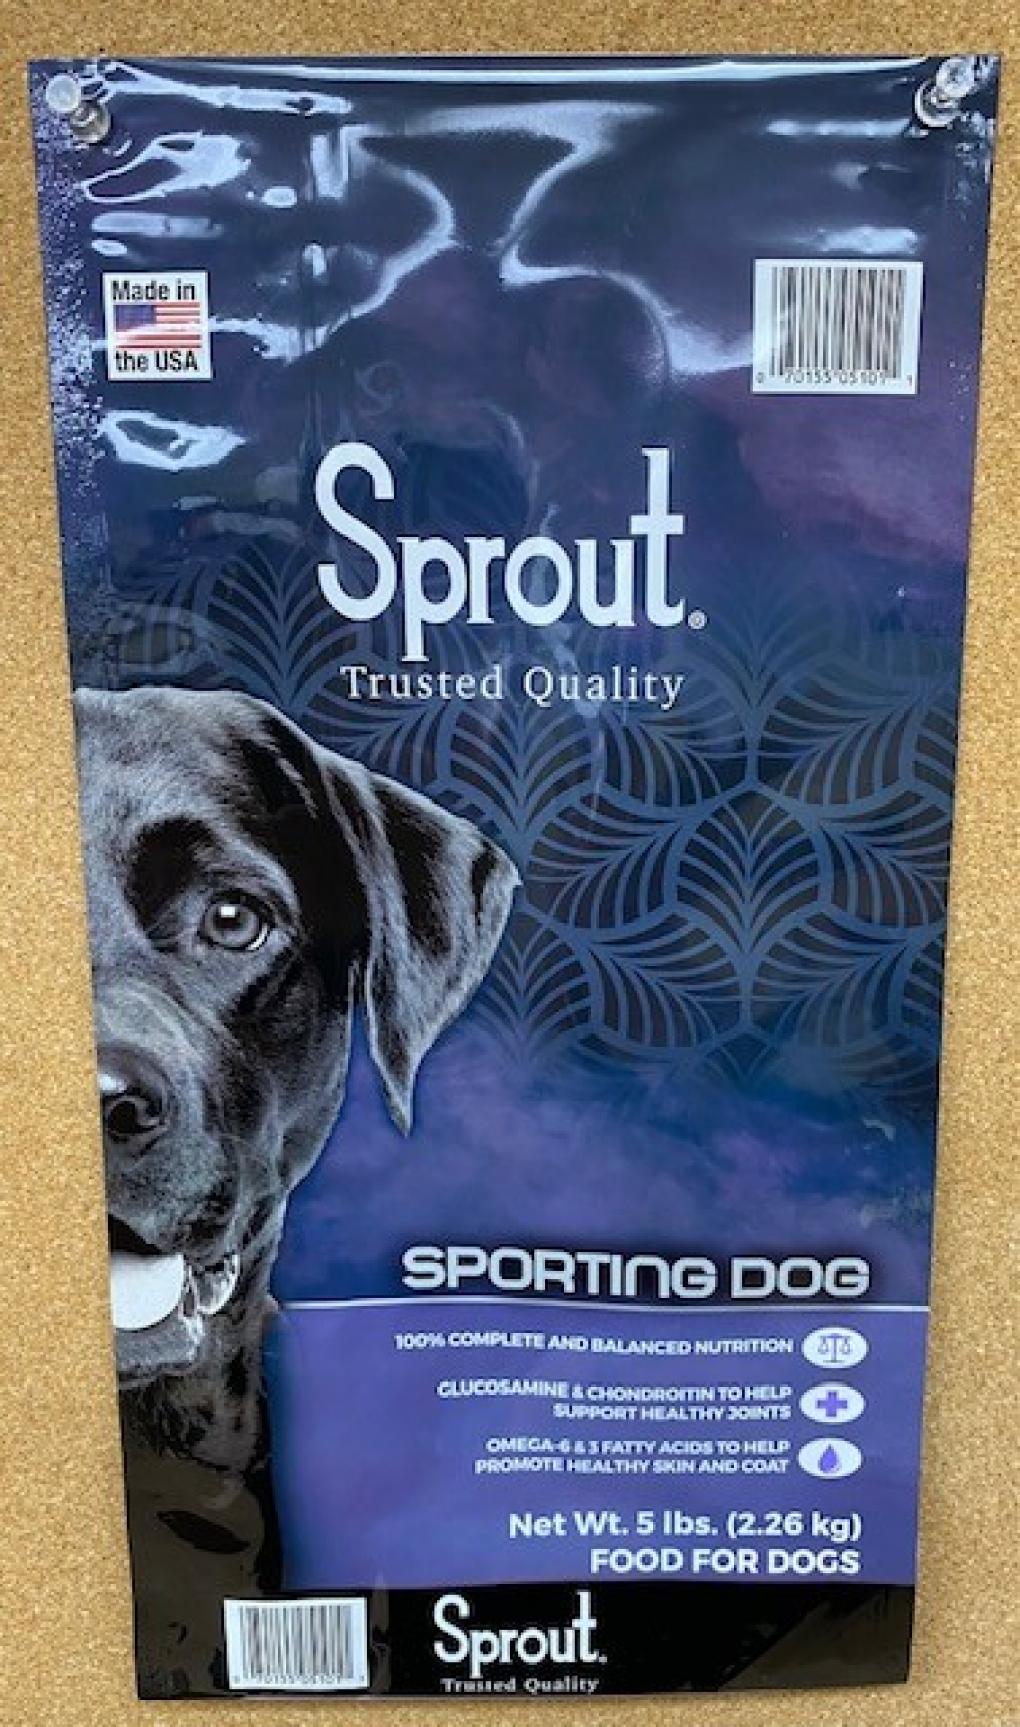 sprout sunshine mills recall